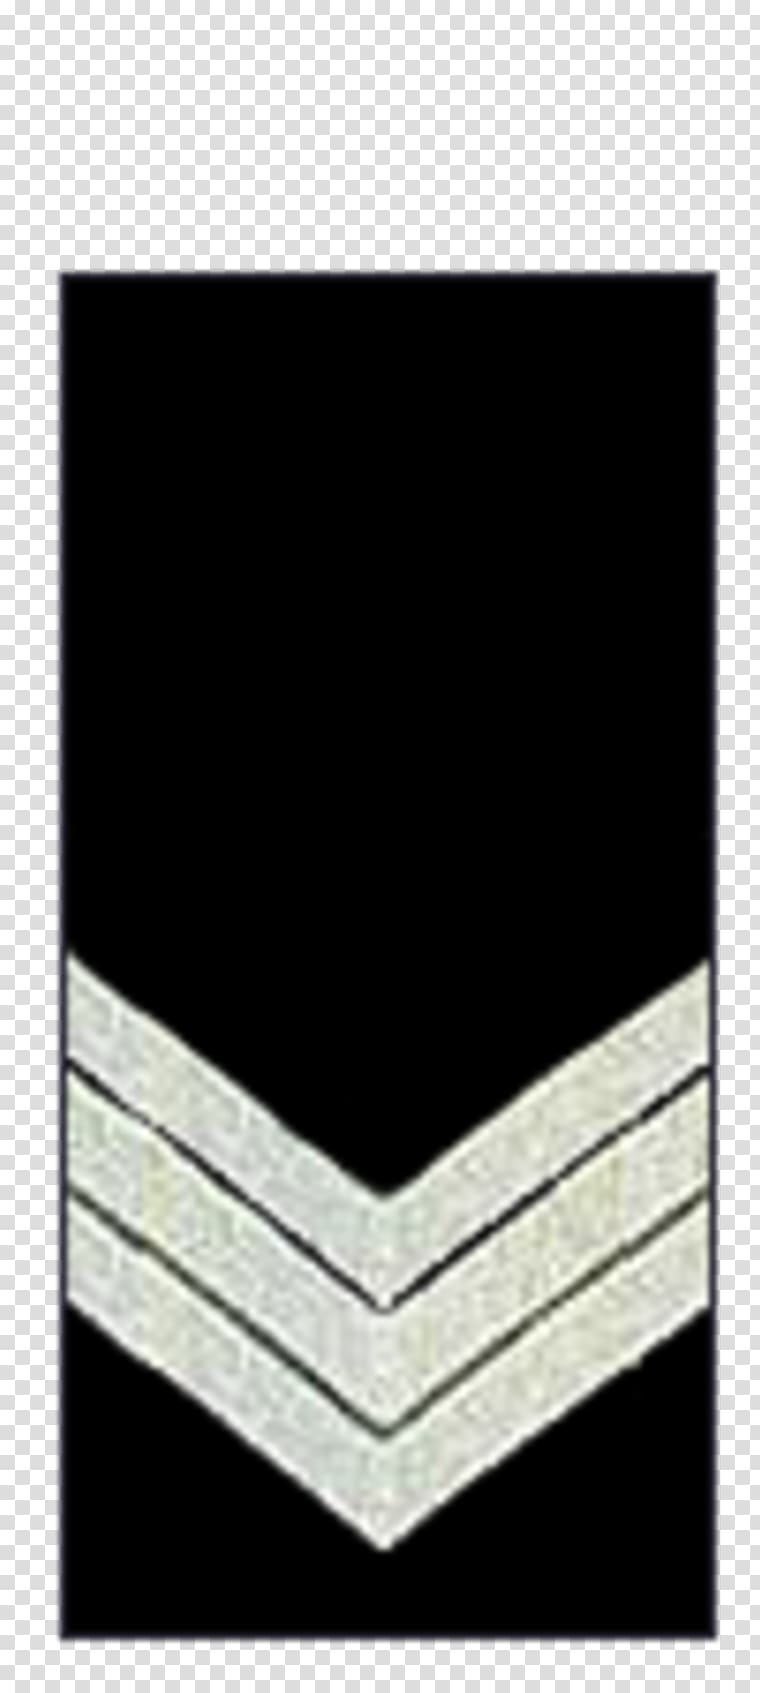 Chief Master Sergeant of the Air Force Gunnery sergeant Police Military rank, Police transparent background PNG clipart